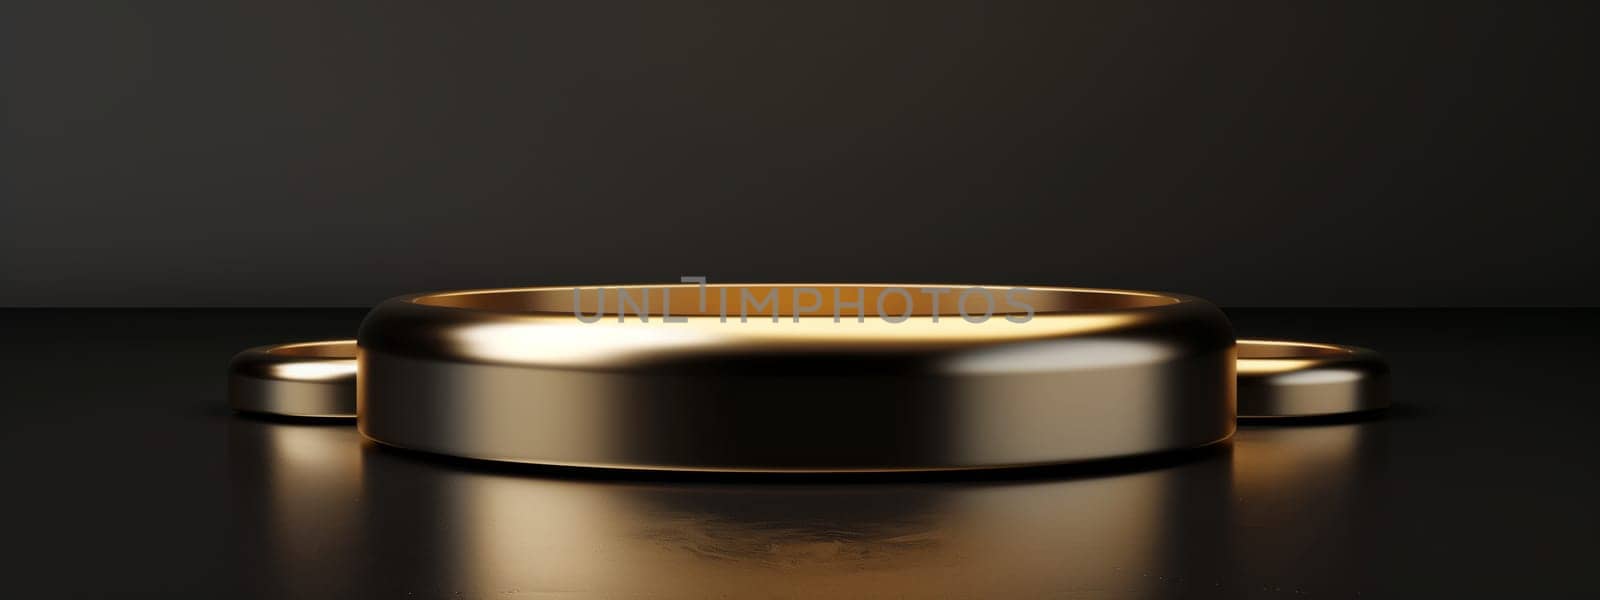 A gold ring is resting on a sleek black surface next to a portable communications device. The shiny metal contrasts with the electric blue of the gadget, creating an intriguing event in the room